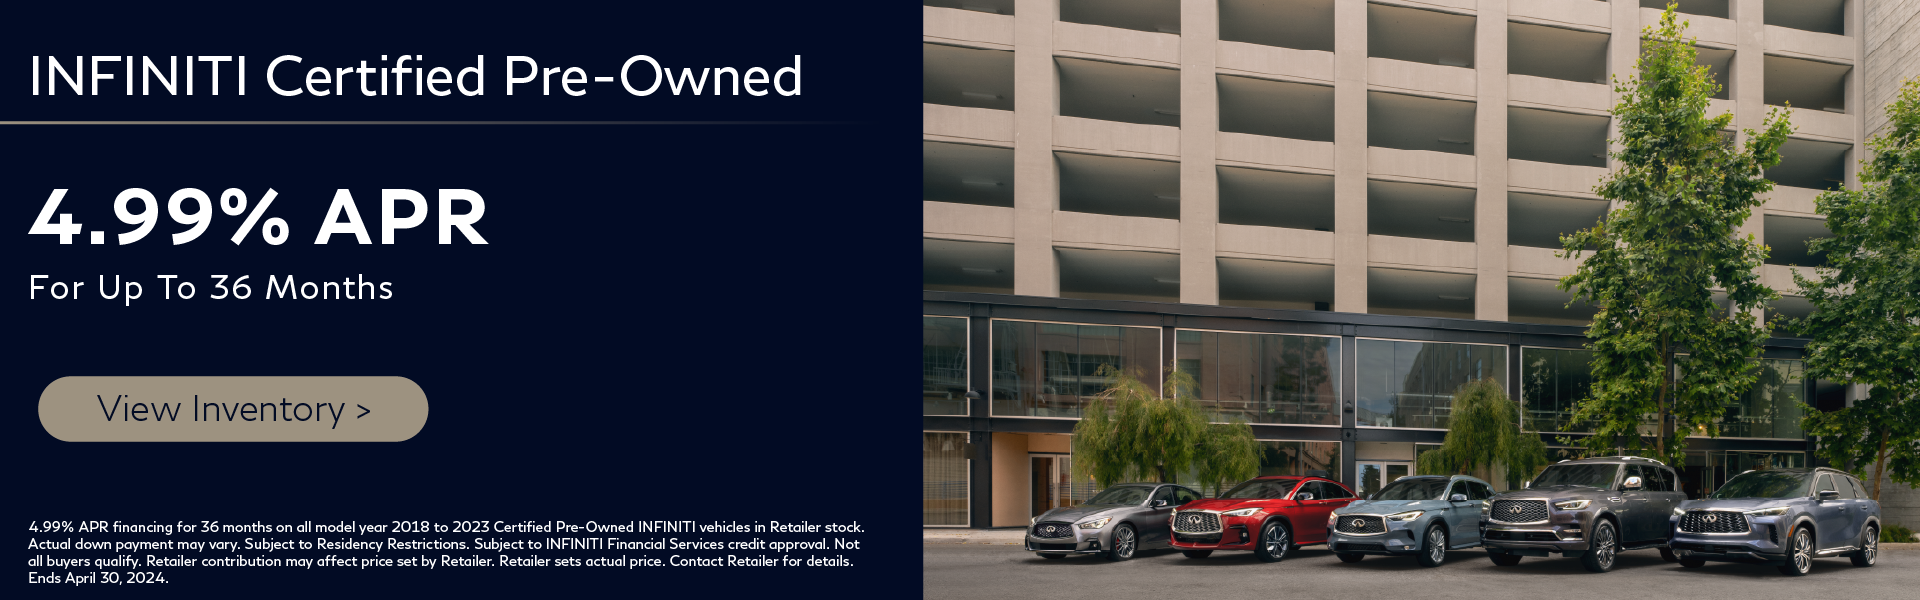 INFINITI Certified Pre-Owned 4.99% APR For Up To 36 Months